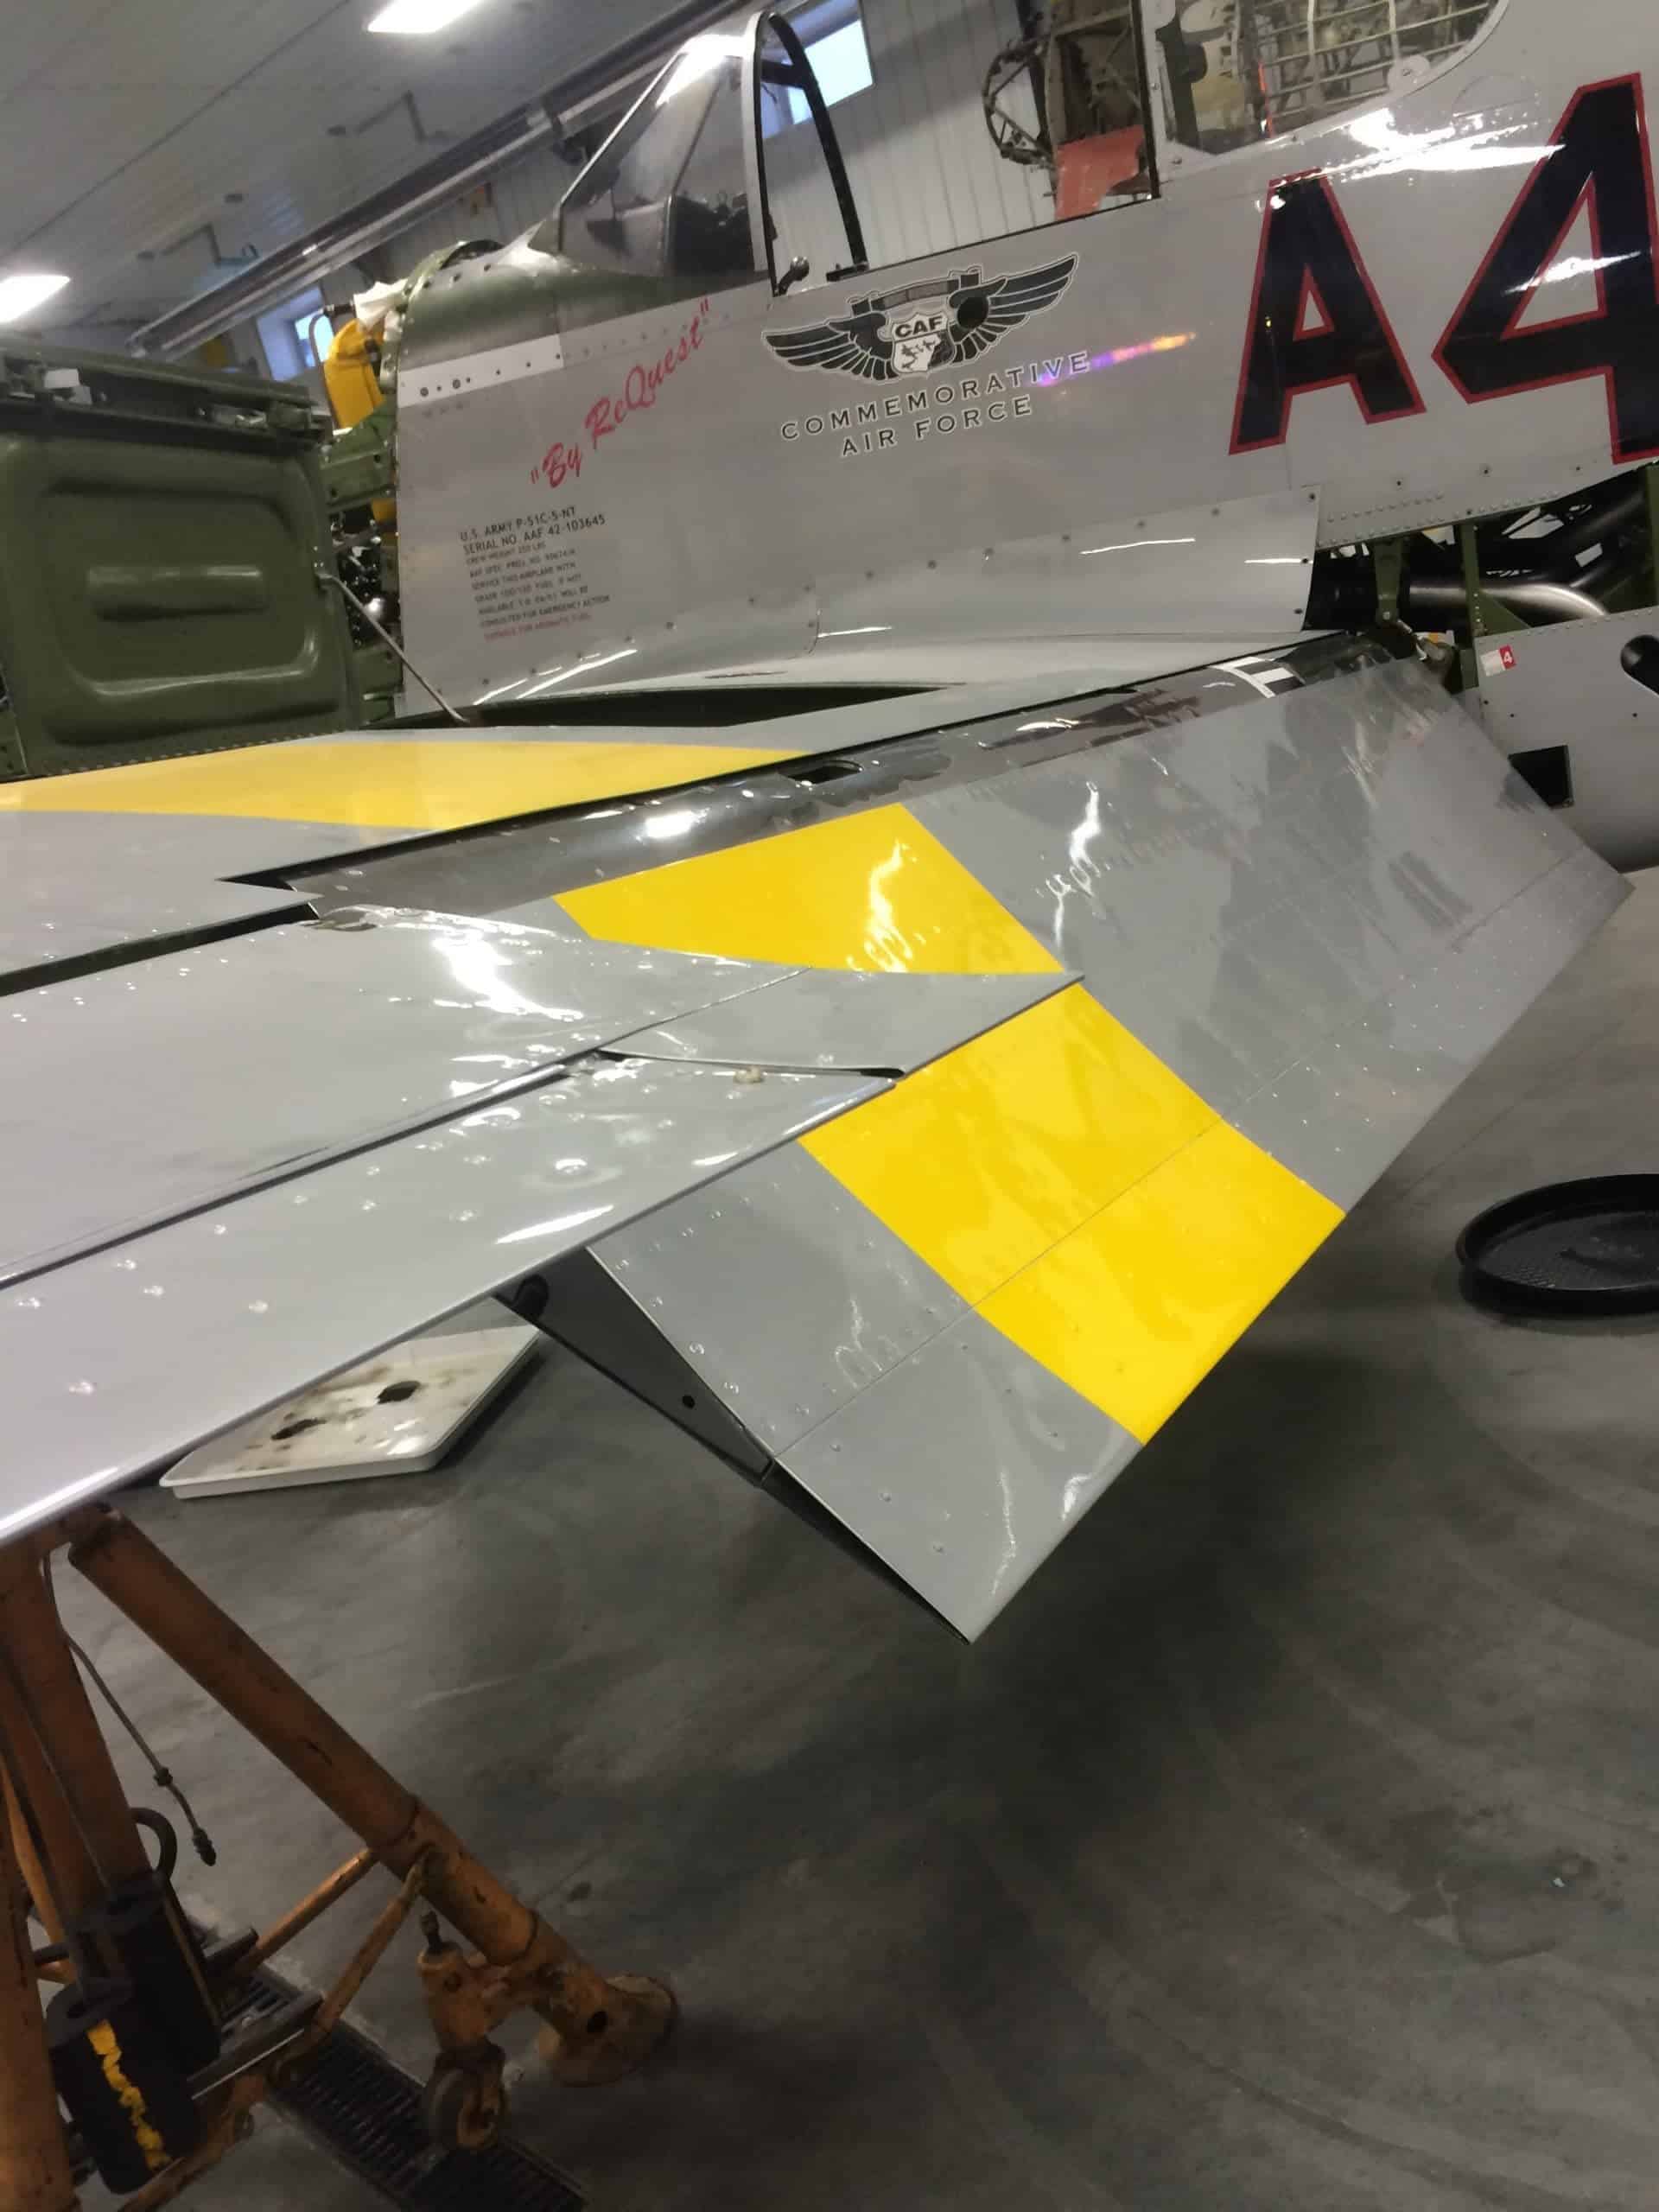 Flap re-installed after aileron cable replacement.